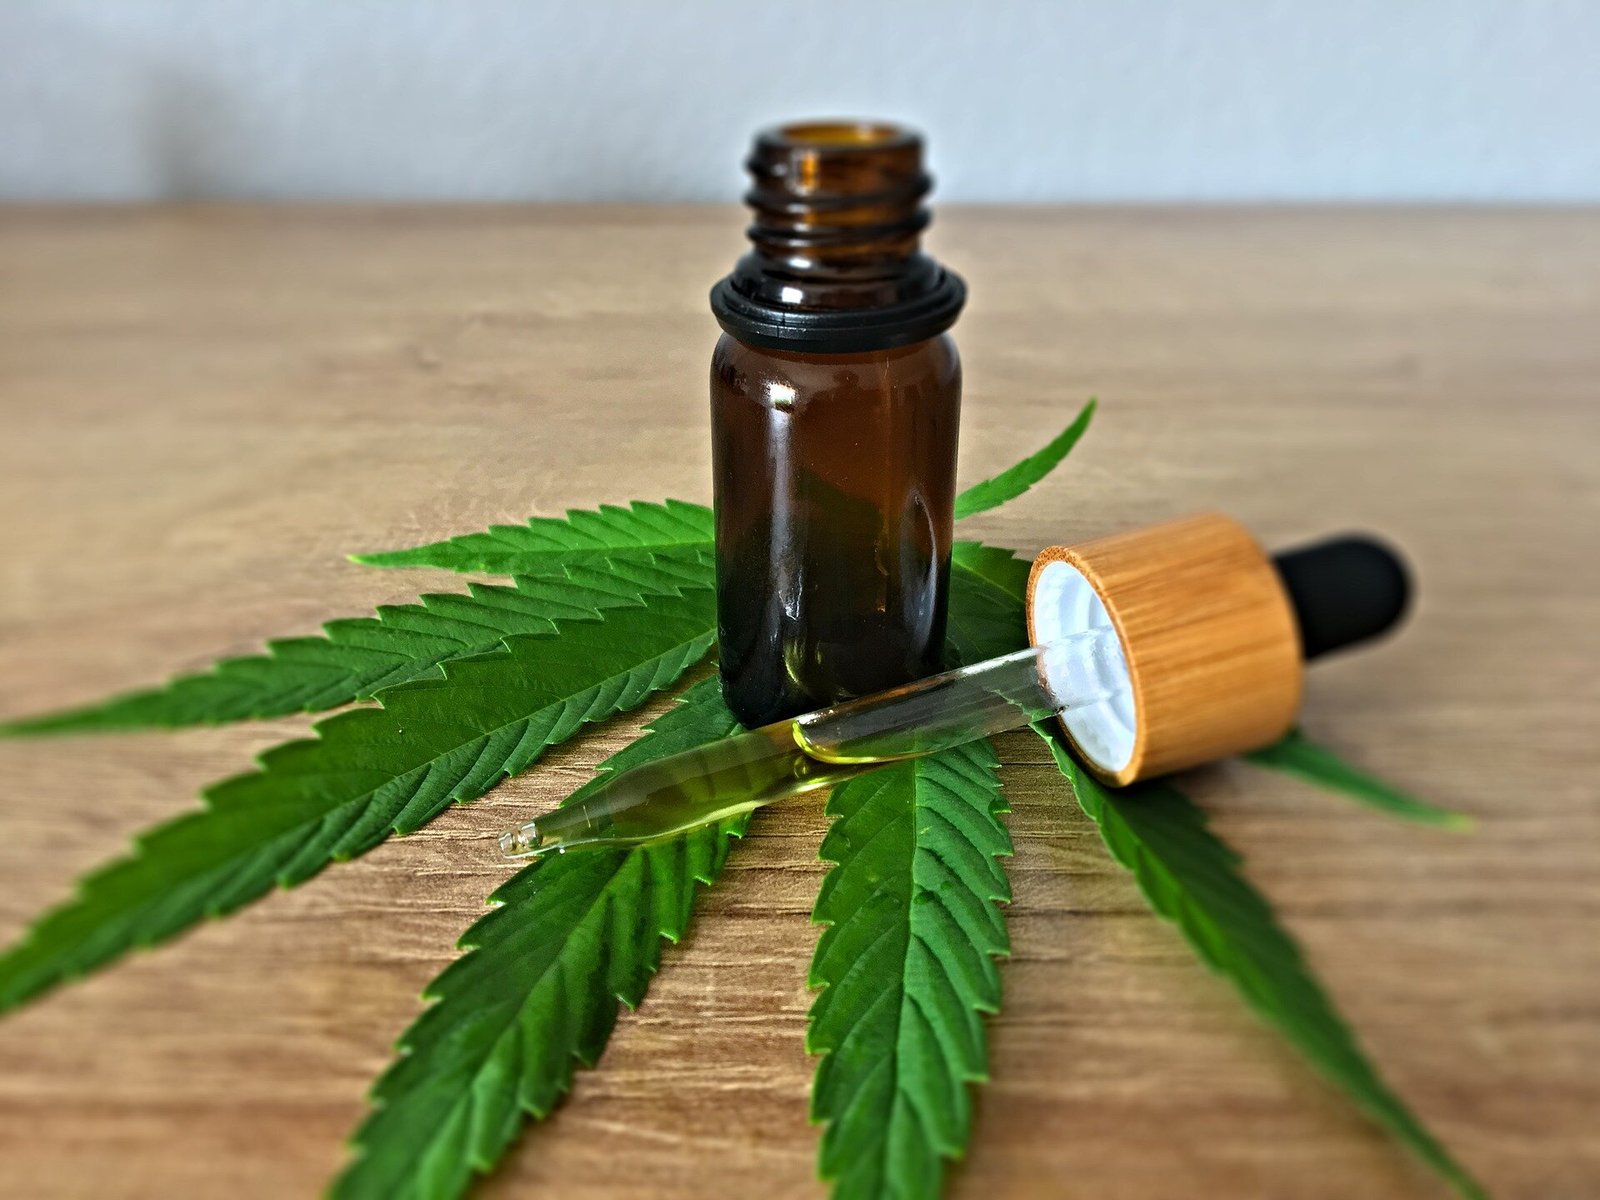 Mouse studies reveal possible benefits of CBD and metformin for treating behavioral difficulties